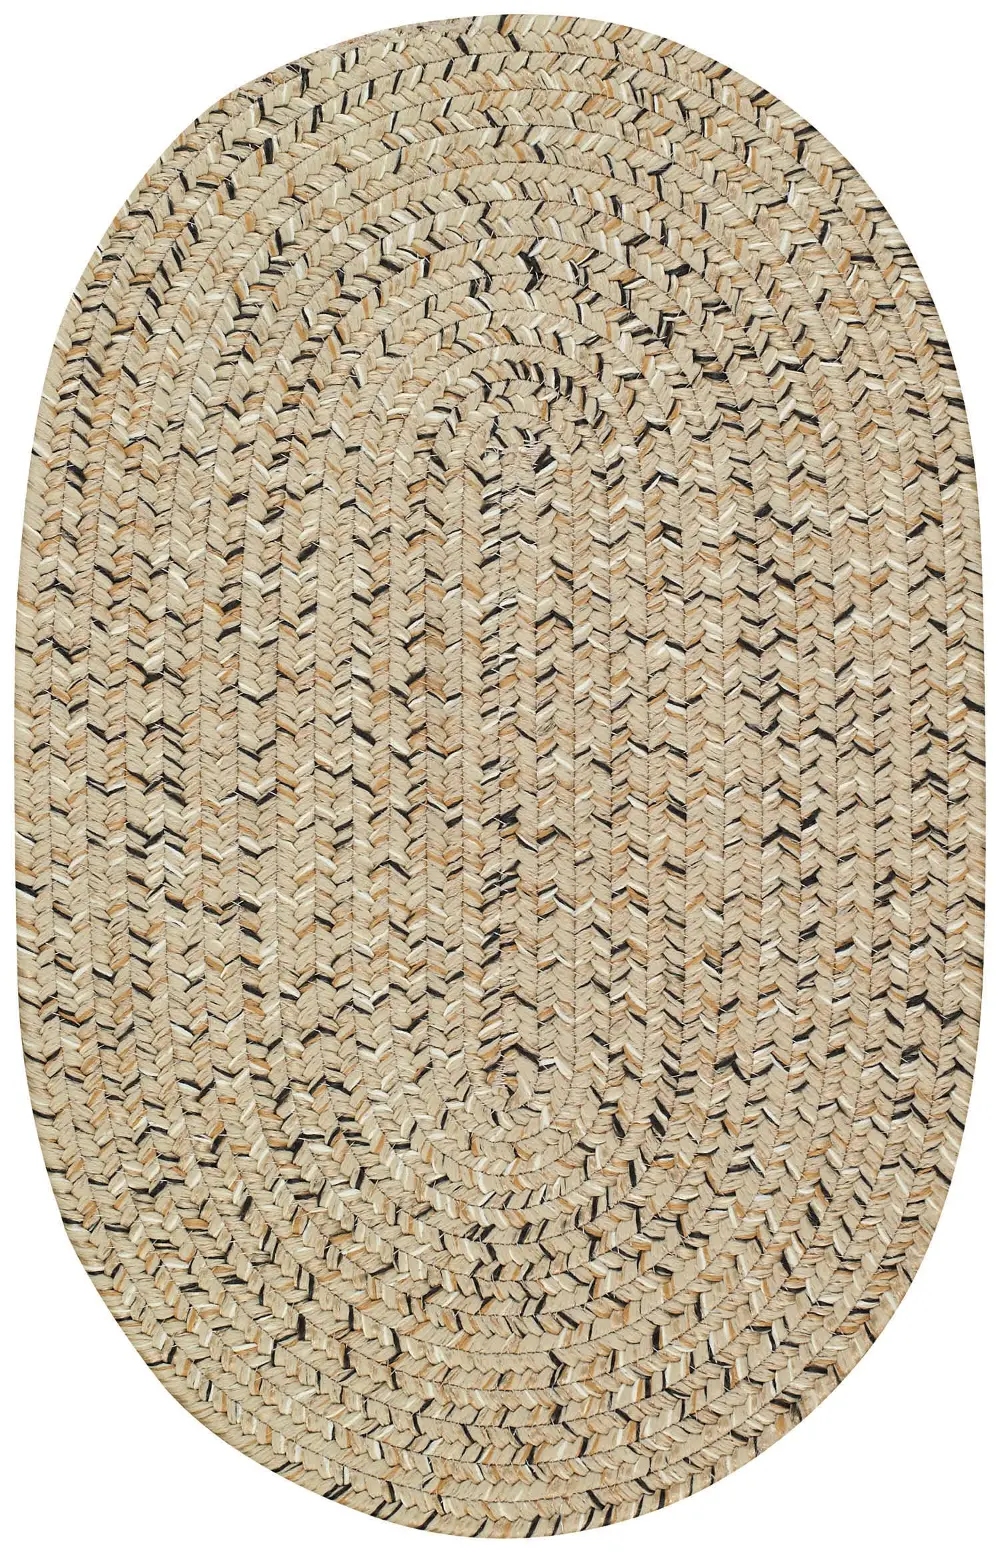 0110VS00200030600 XX-Small Shell Taupe Oval Braided Indoor-Outdoor Rug - Sea Glass-1